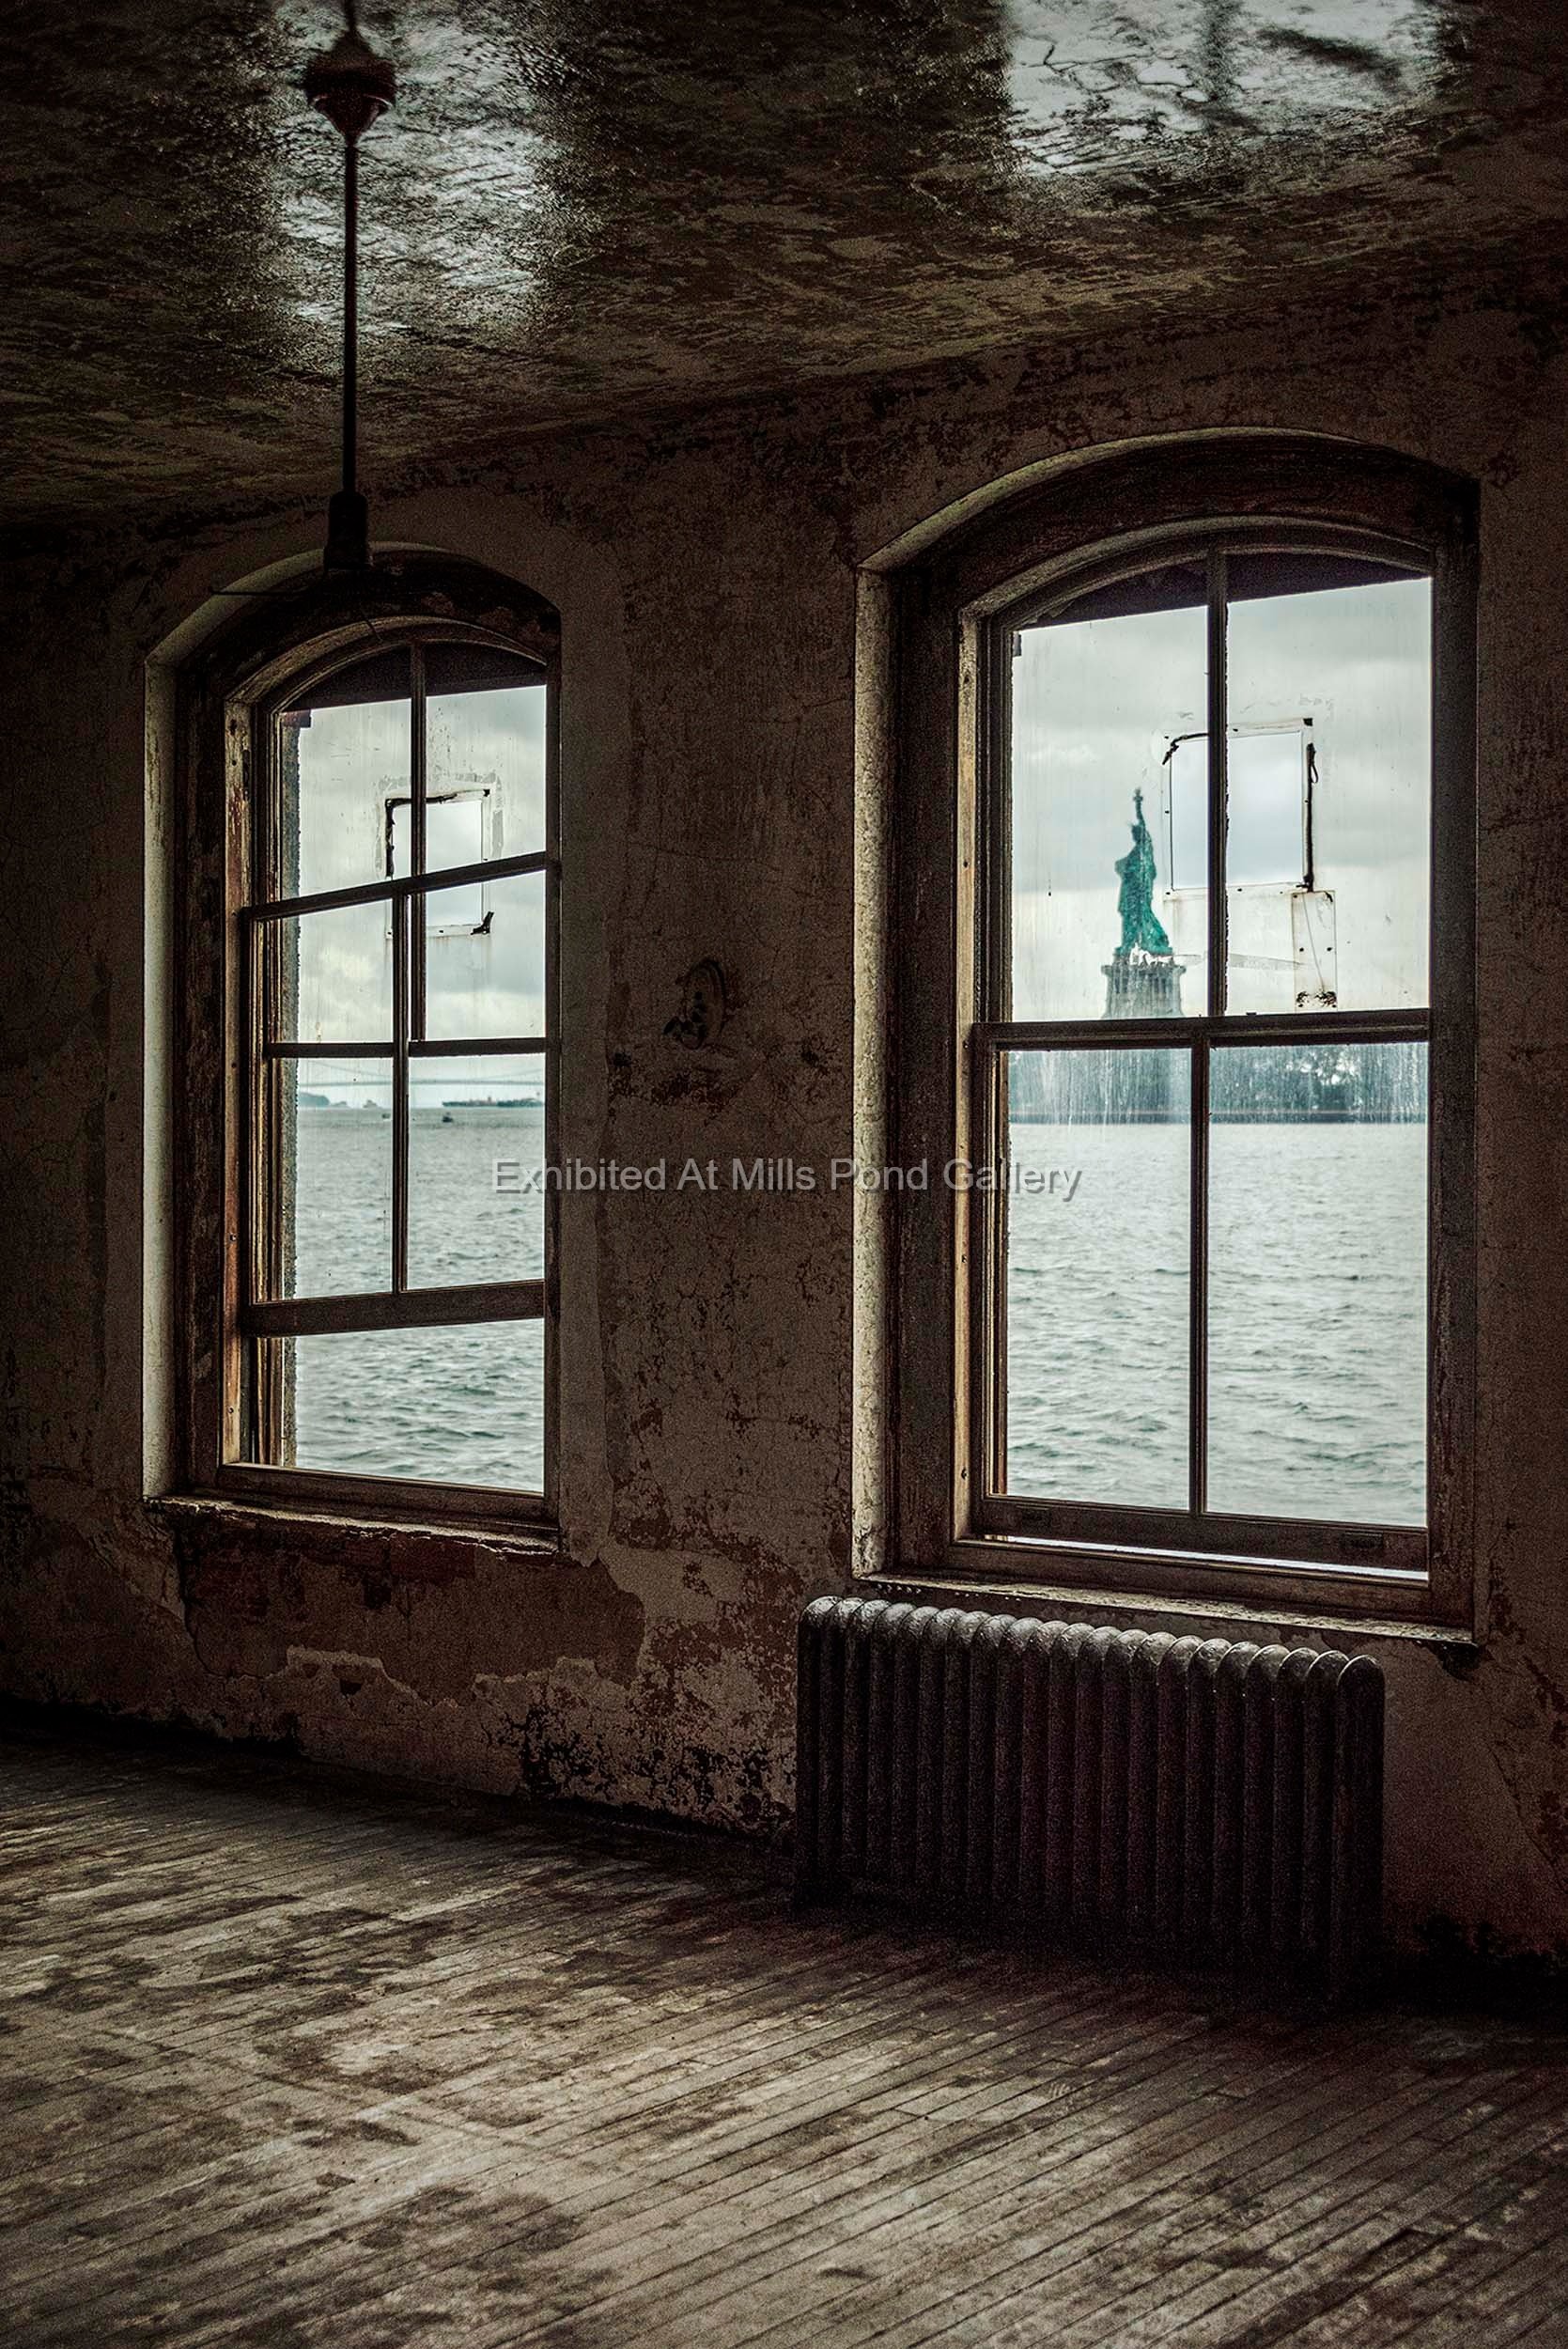 Paul Mele-A Room With A View-Archival Pigment Print